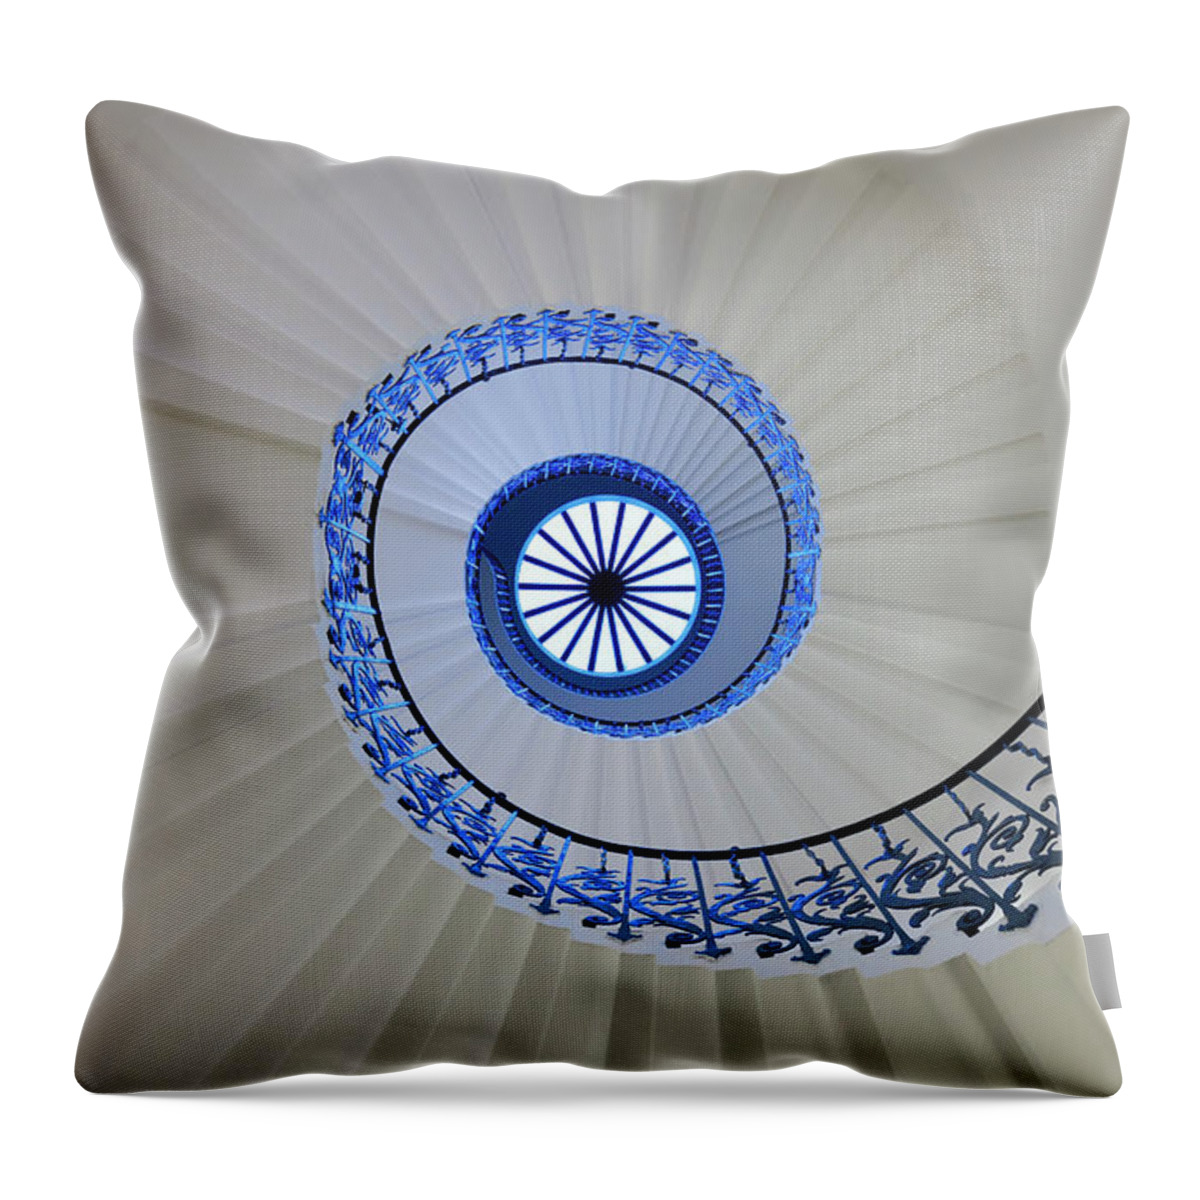 Directly Below Throw Pillow featuring the photograph Spiral Staircase by Peter Adams